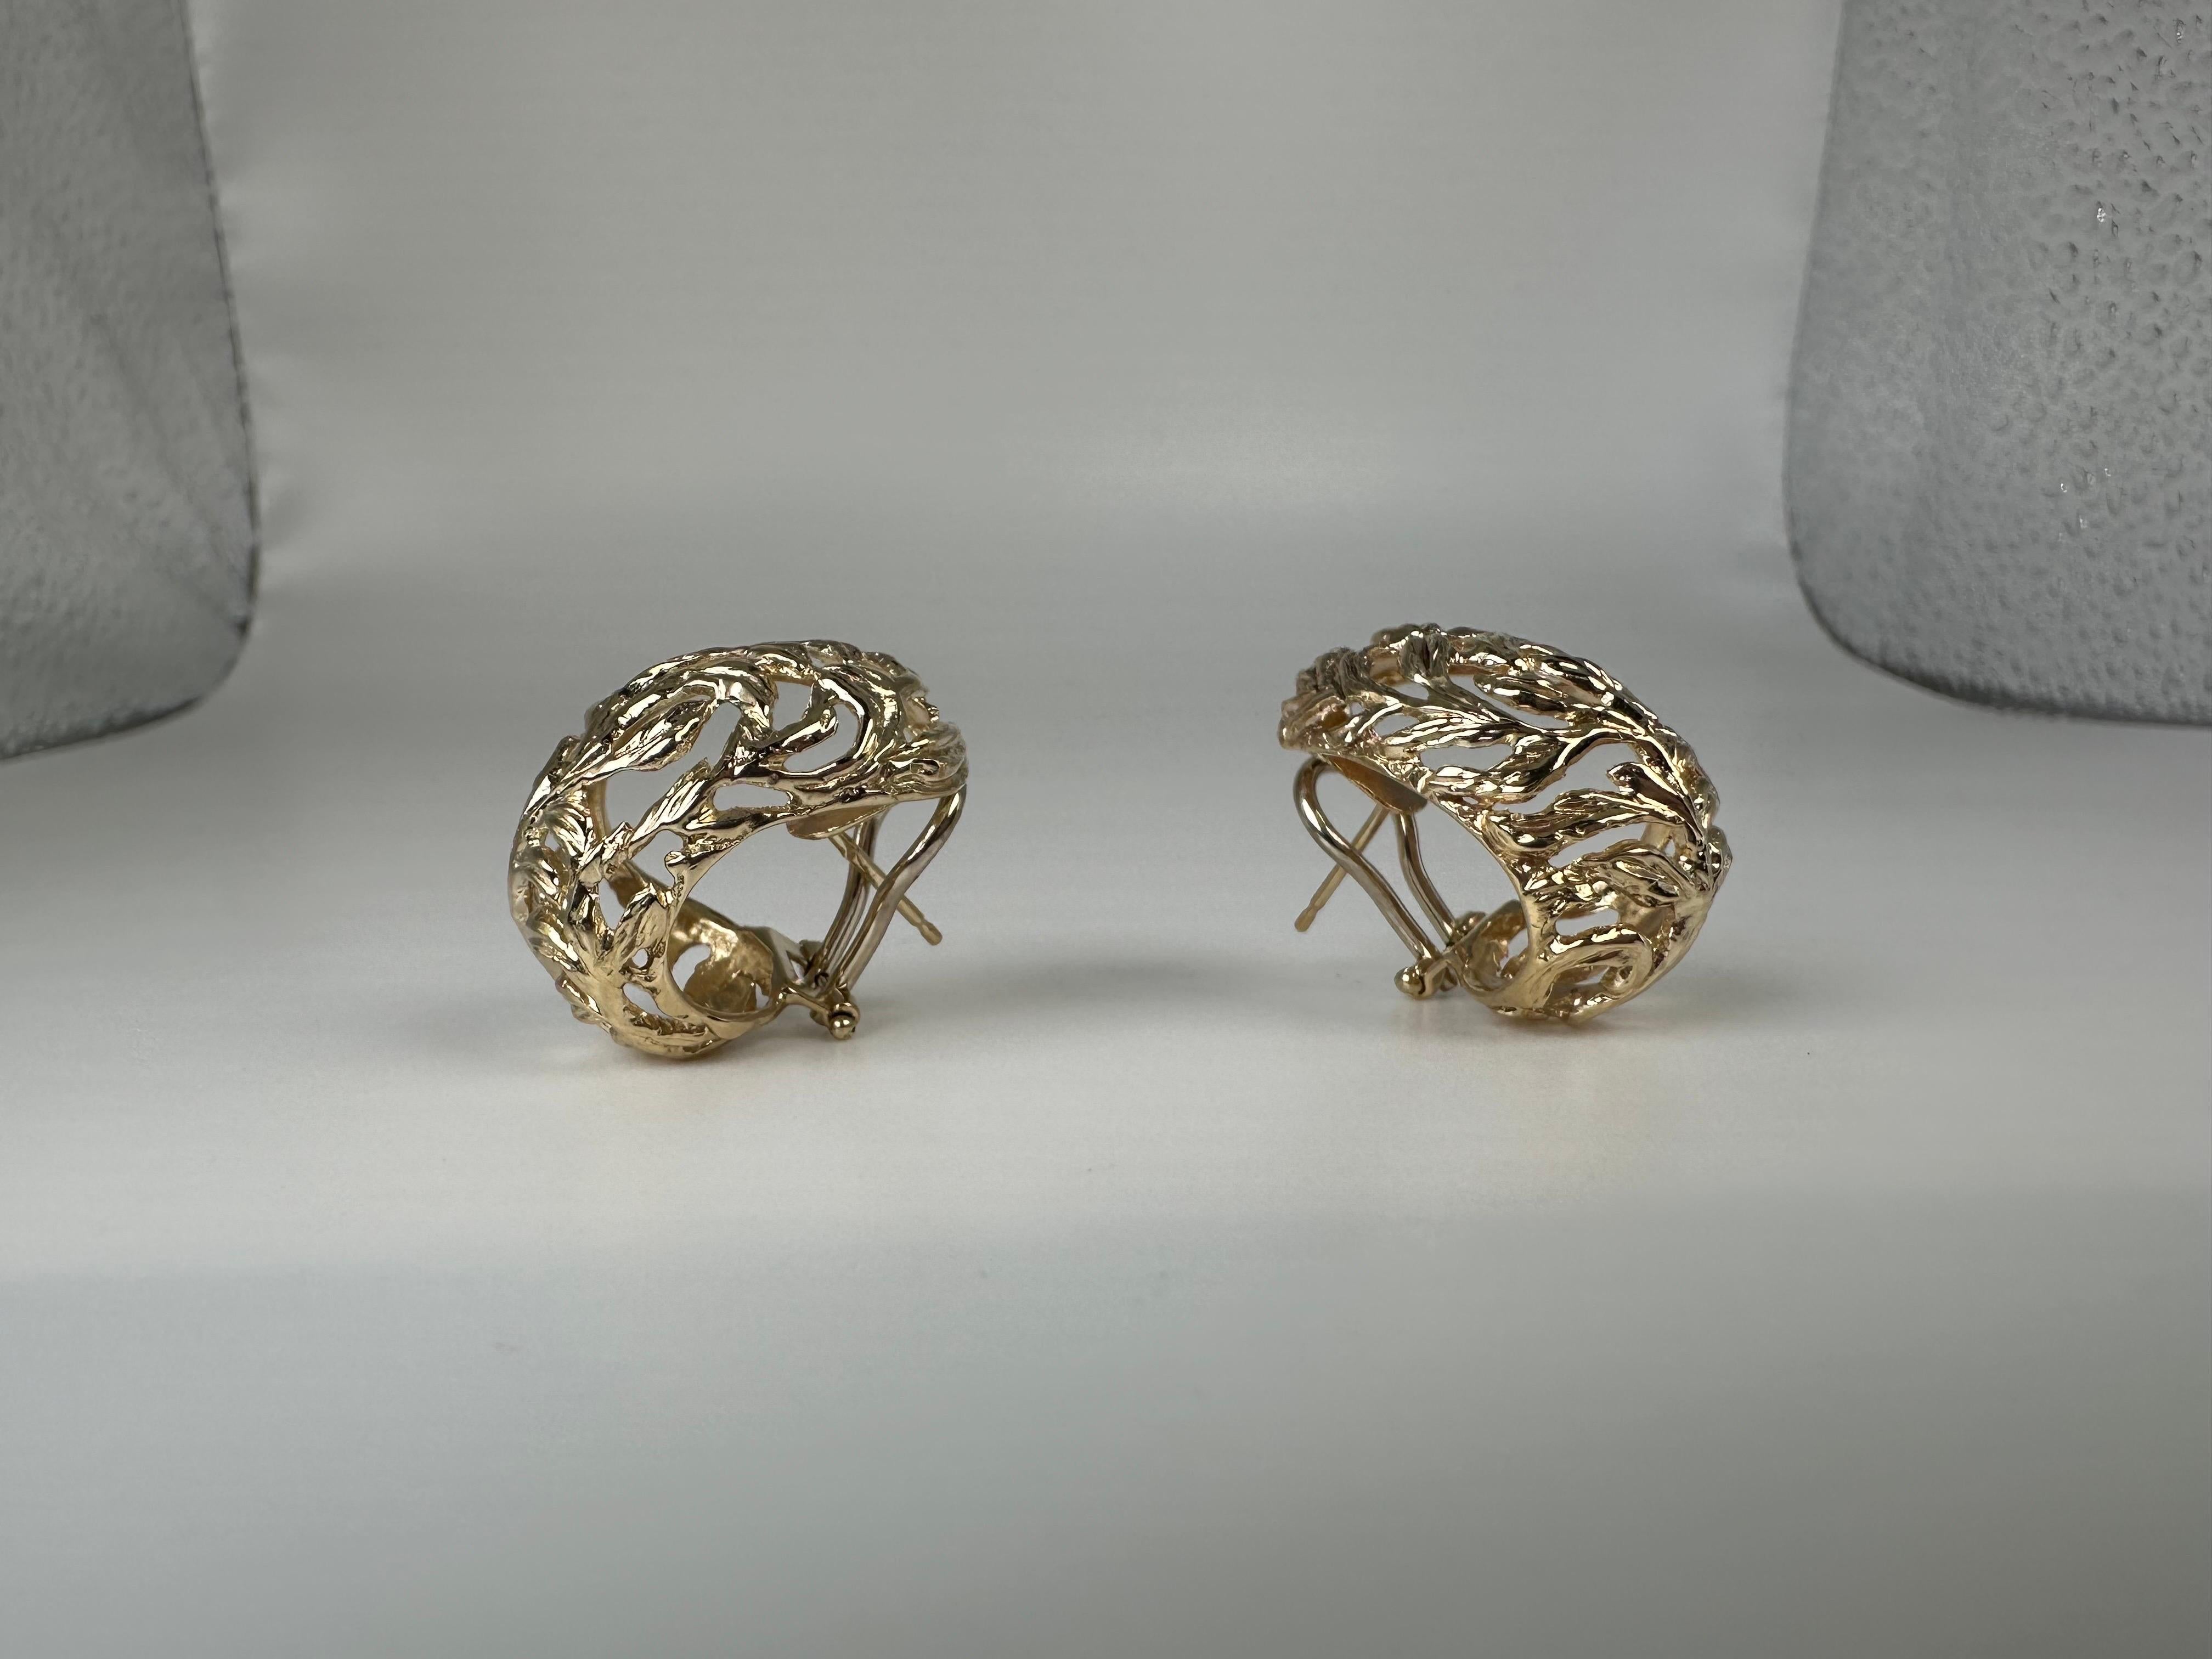 Filligree earrings dome earrings 14KT yellow gold In New Condition For Sale In Jupiter, FL